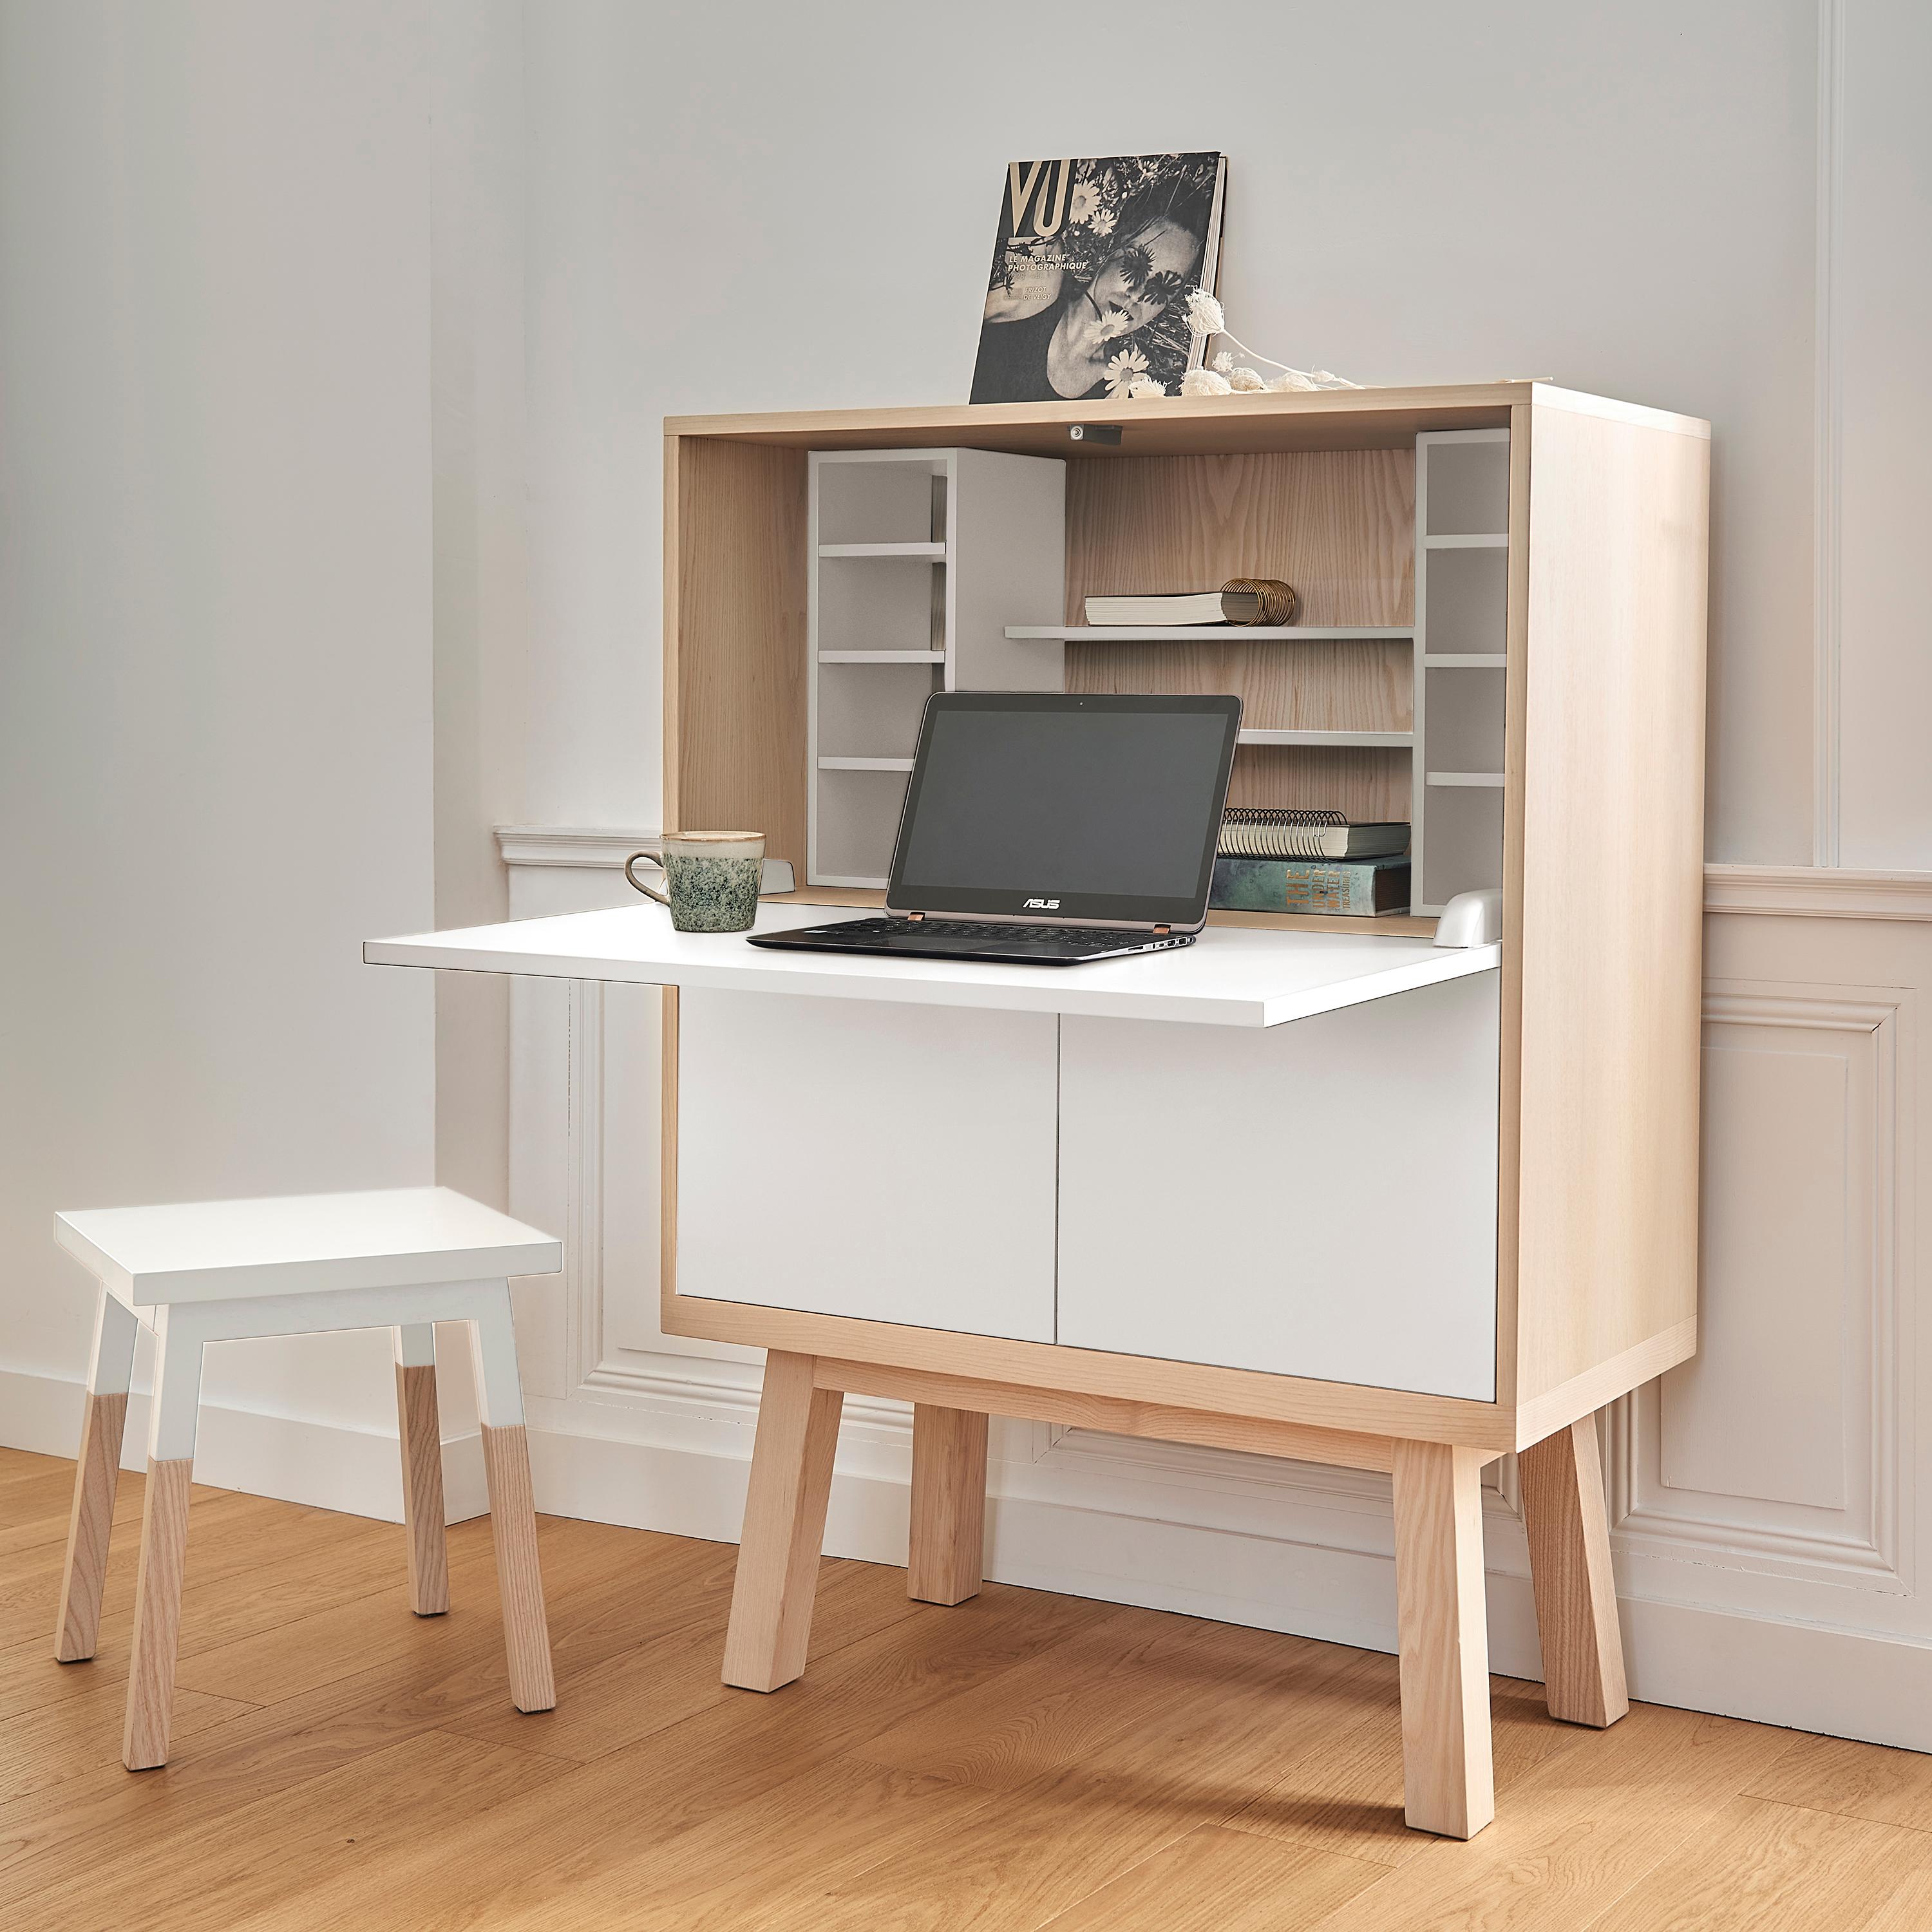 This Secretary desk in solid and veneer ash wood is designed by famous parisian Designer Eric Gizard 

The Kube itself (without the feet height) is Width 90 cm / 35.4'' x Height 90 cm / 35.4'' x Depth 46 cm / 18;11''

Measures: Height of the